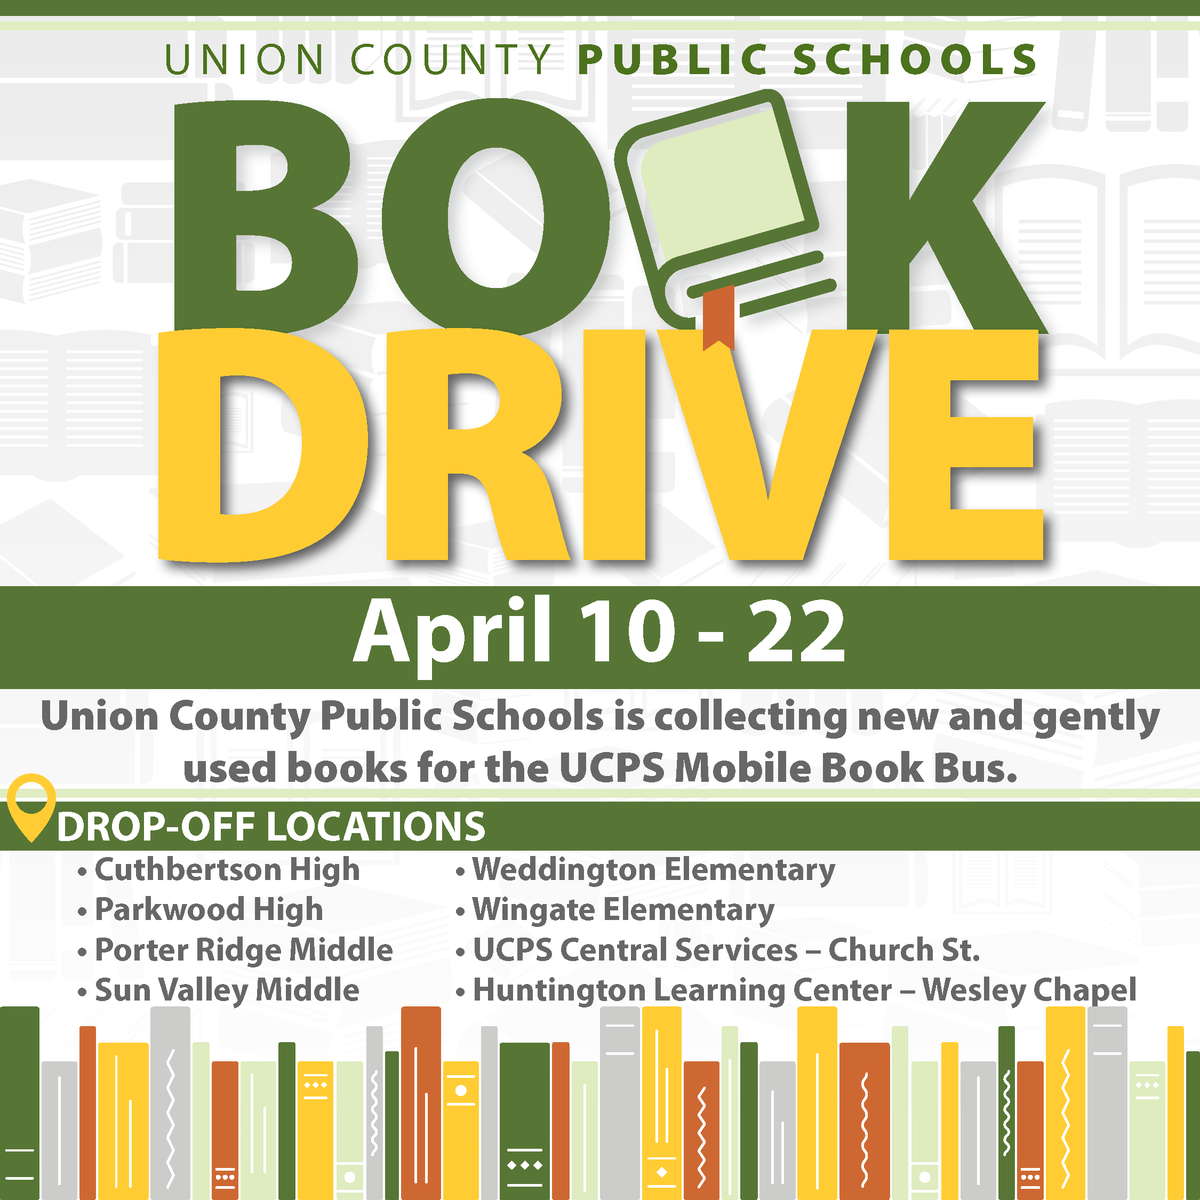 It's almost time for our annual Book Drive! We are collecting new and gently used books for the #UCPS Mobile Book Bus, April 10-22. The goal is to help students improve their literacy skills over the summer. #TeamUCPS #Literacy @AGHoulihan